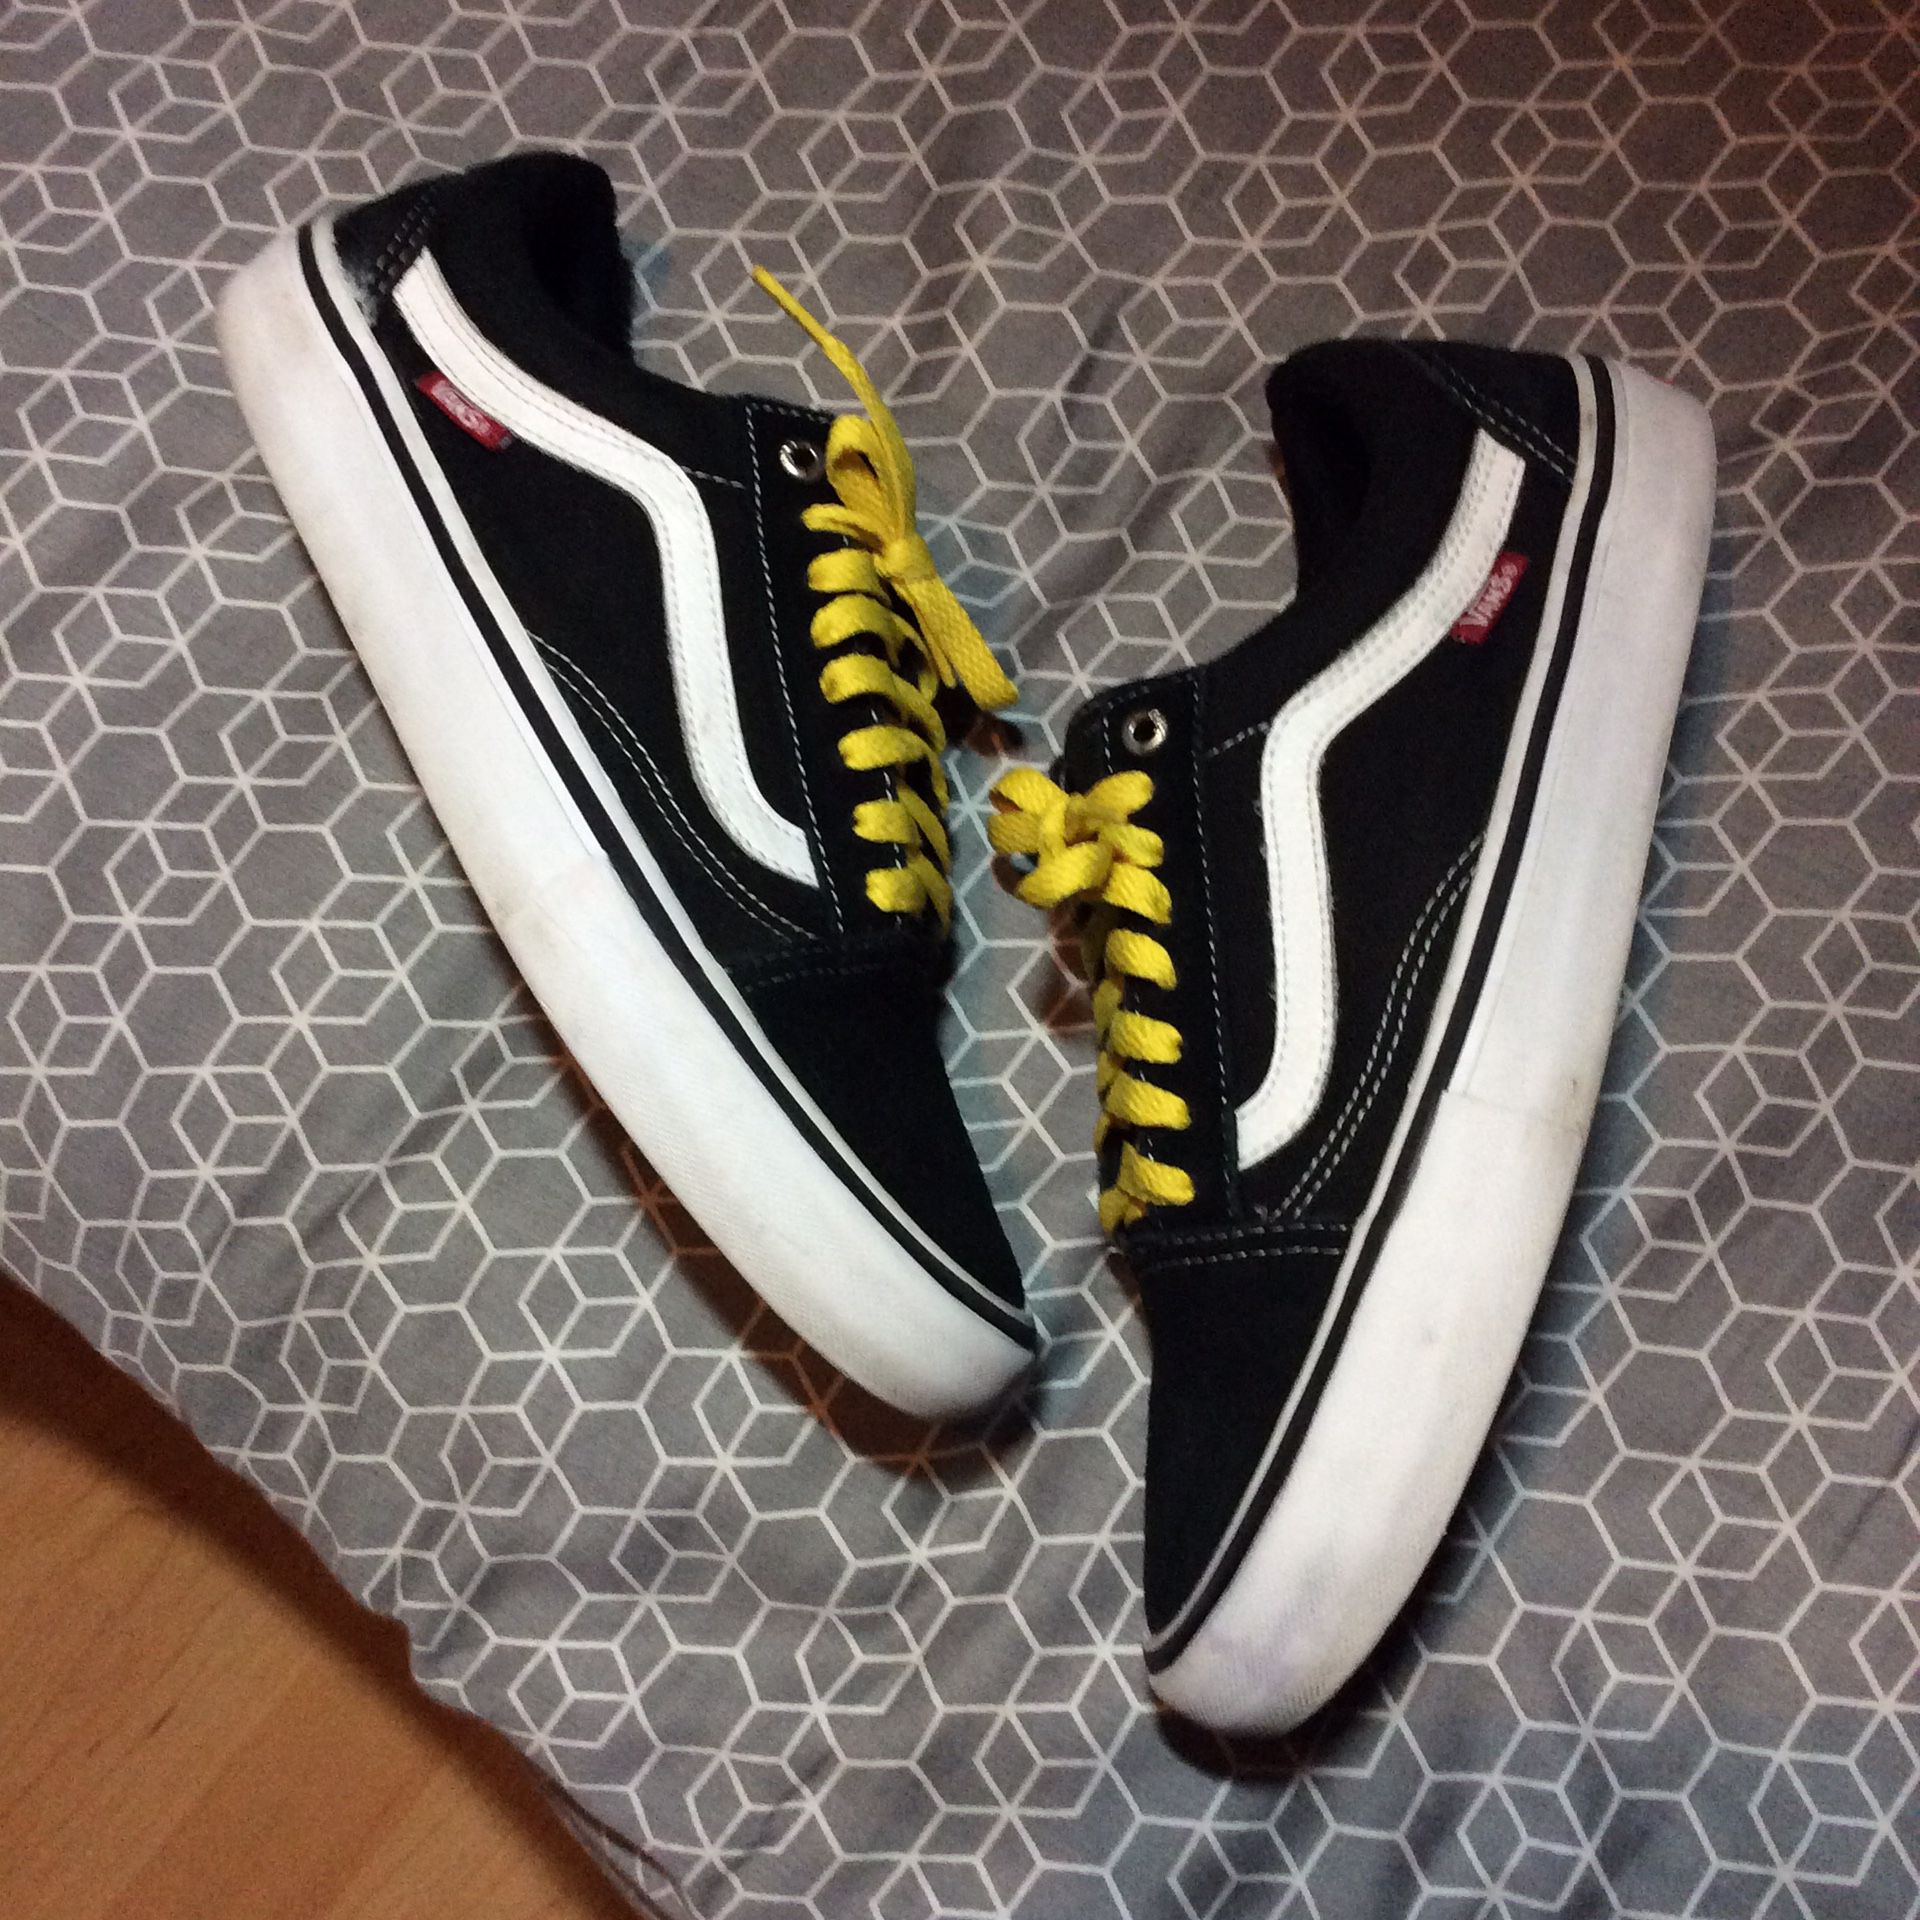 Old Skool yellow laces for Sale in San Antonio, TX